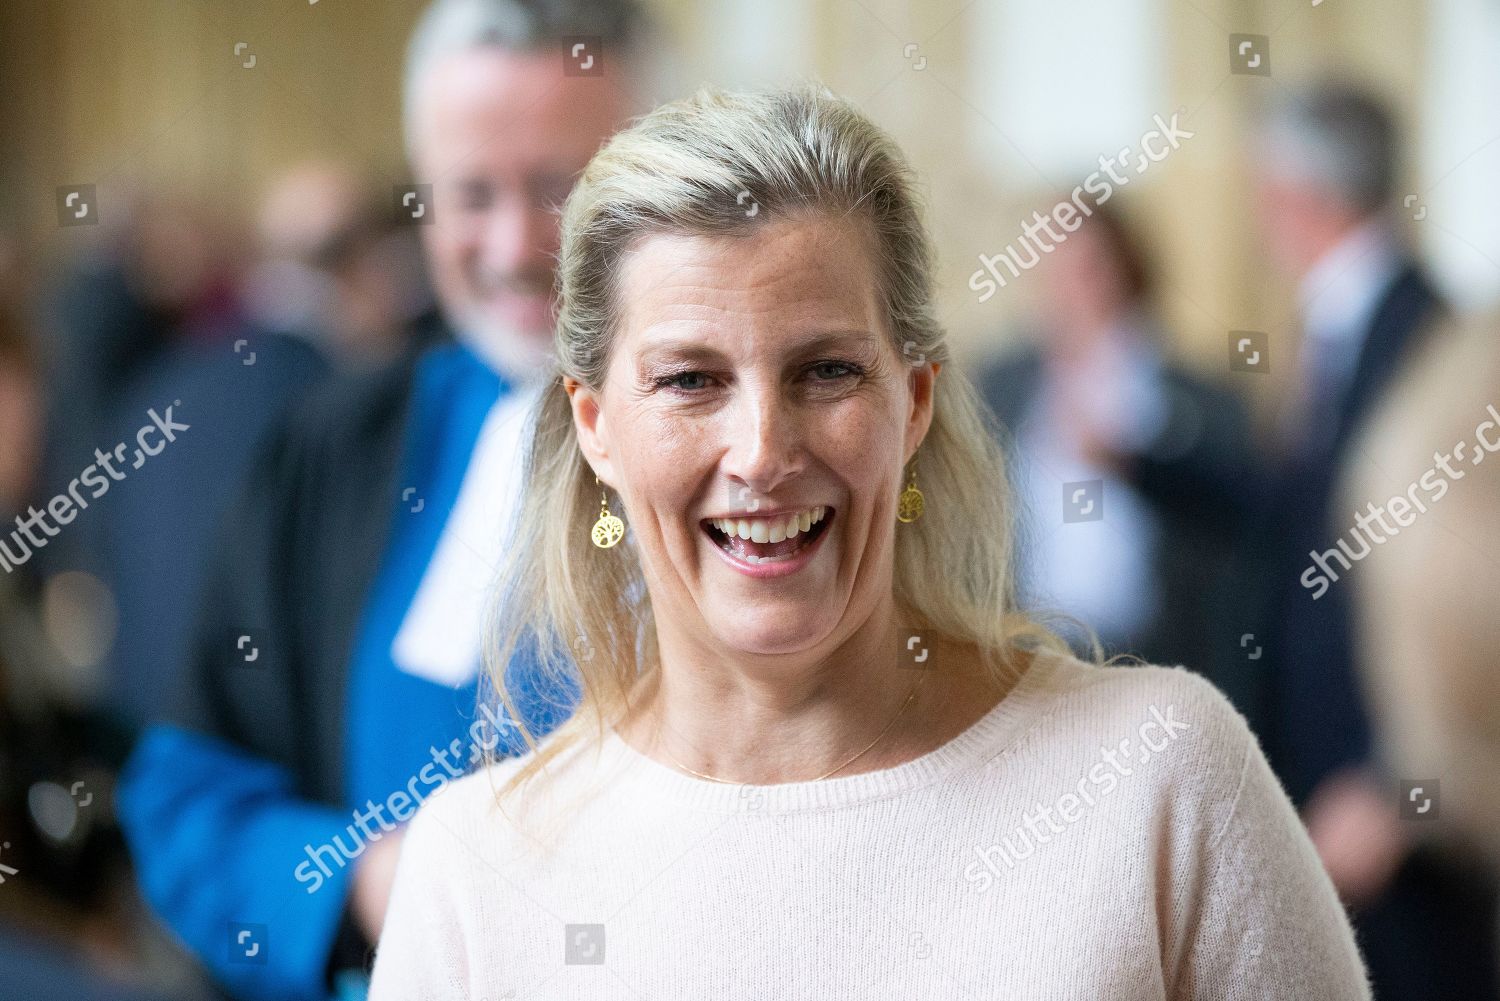 sophie-countess-of-wessex-visit-to-wells-cathedral-and-cathedral-school-somerset-uk-shutterstock-editorial-10422906l.jpg